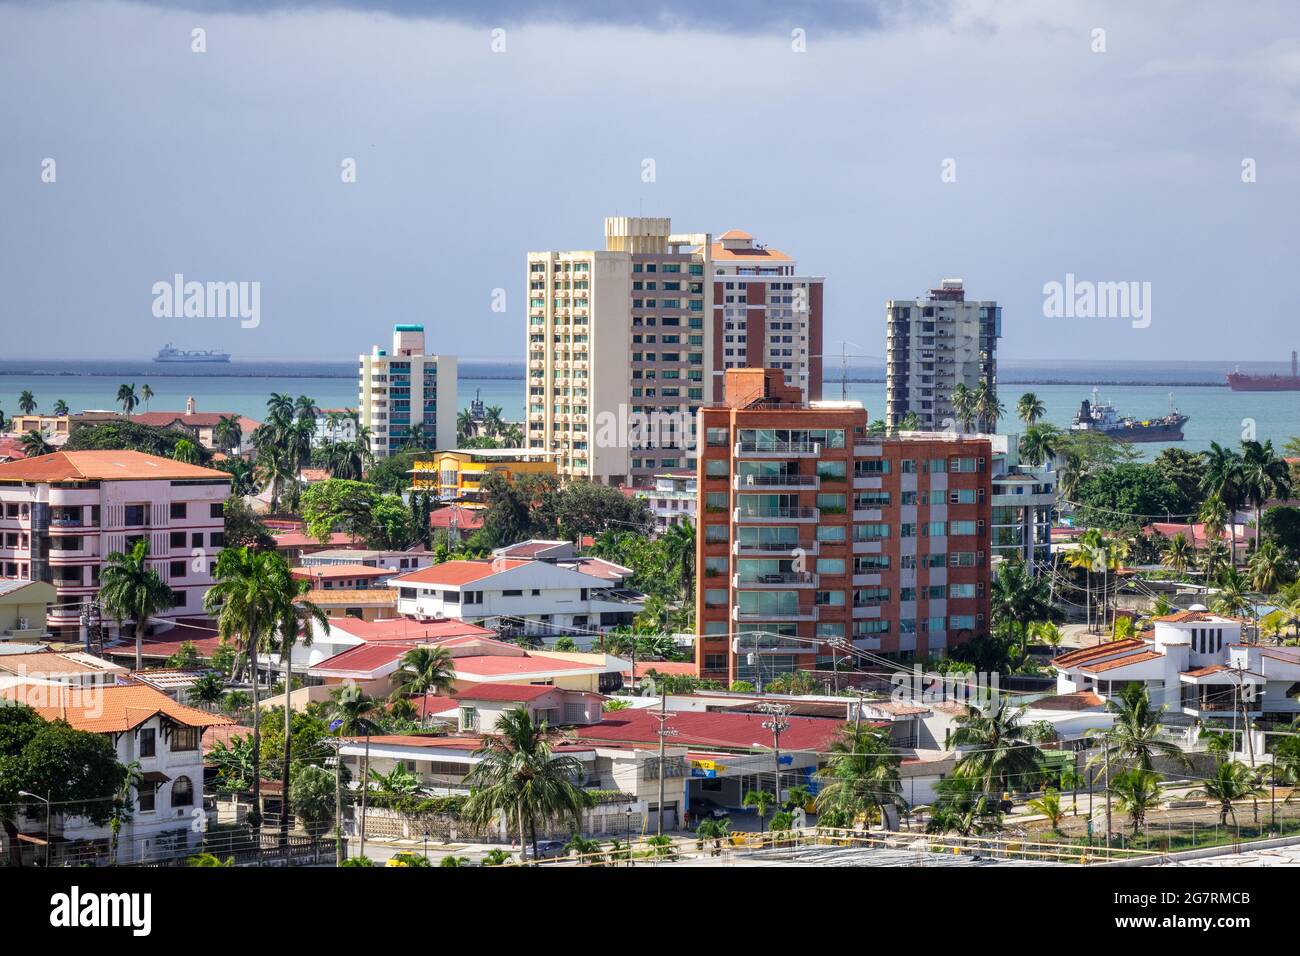 Residential Area Of Colon Panama With Houses And High Rise Apartment Buildings Overlooking The Entrance To The Panama Canal Stock Photo